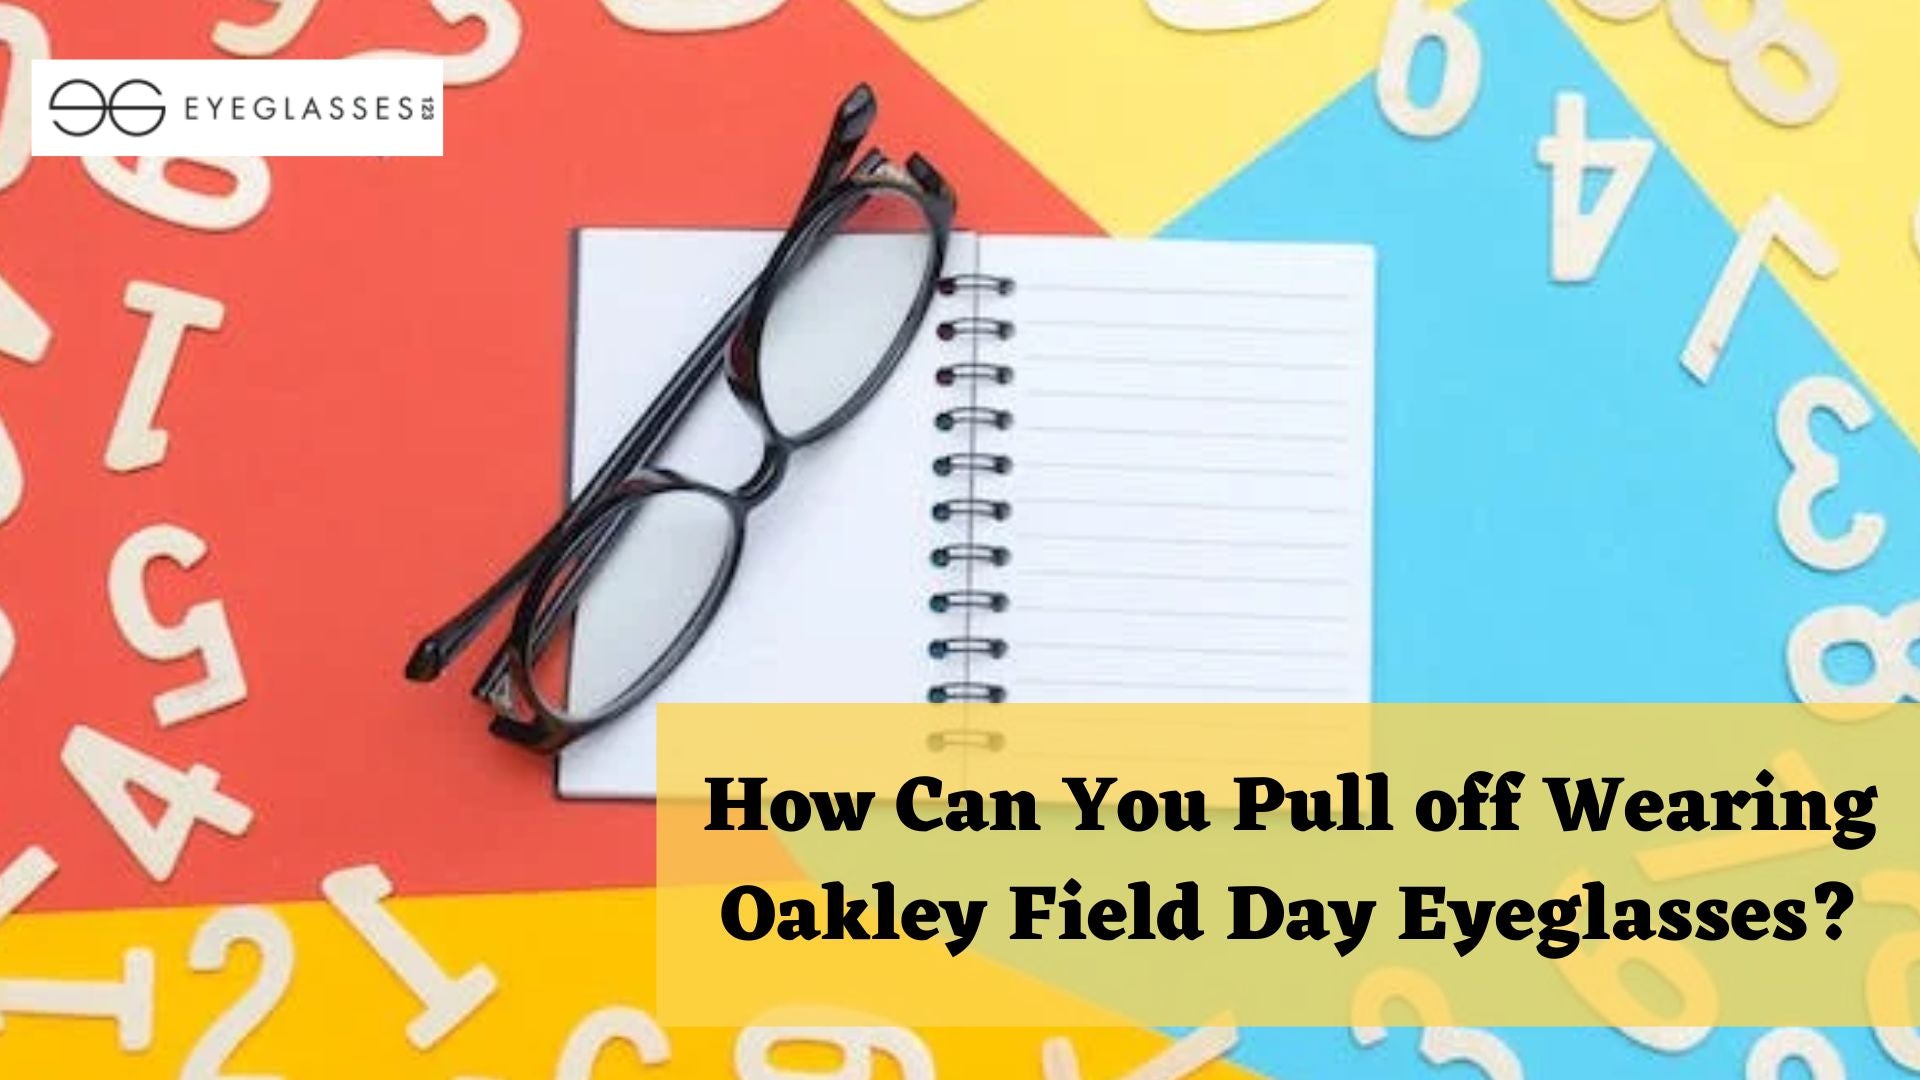 How Can You Pull off Wearing Oakley Field Day Eyeglasses?